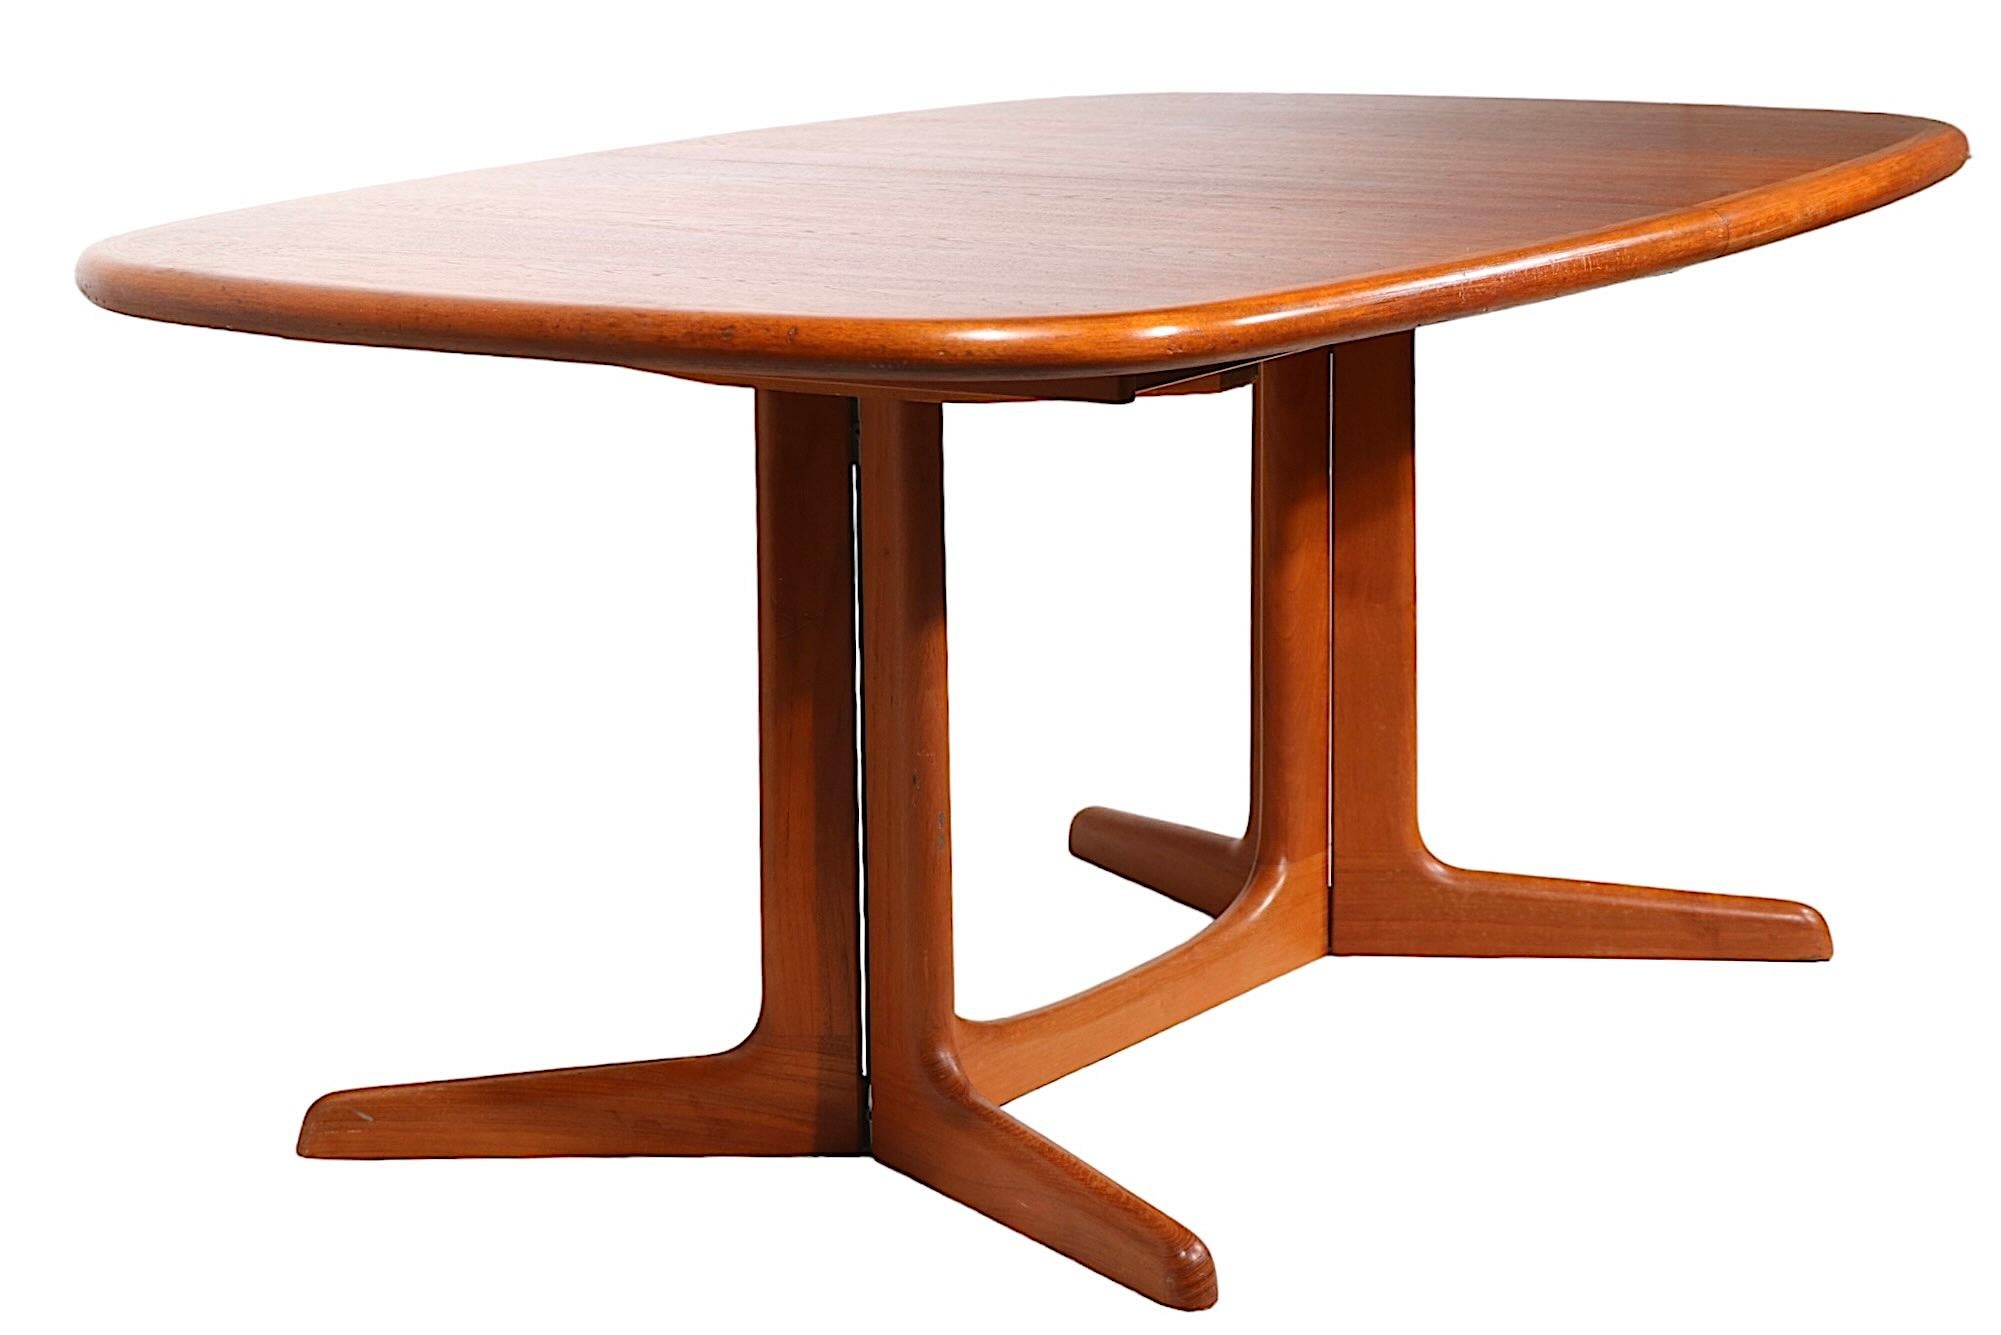 Danish Mid Century Oval Teak Dining Table by Niels Otto Moller for Gudme c 1970s For Sale 4